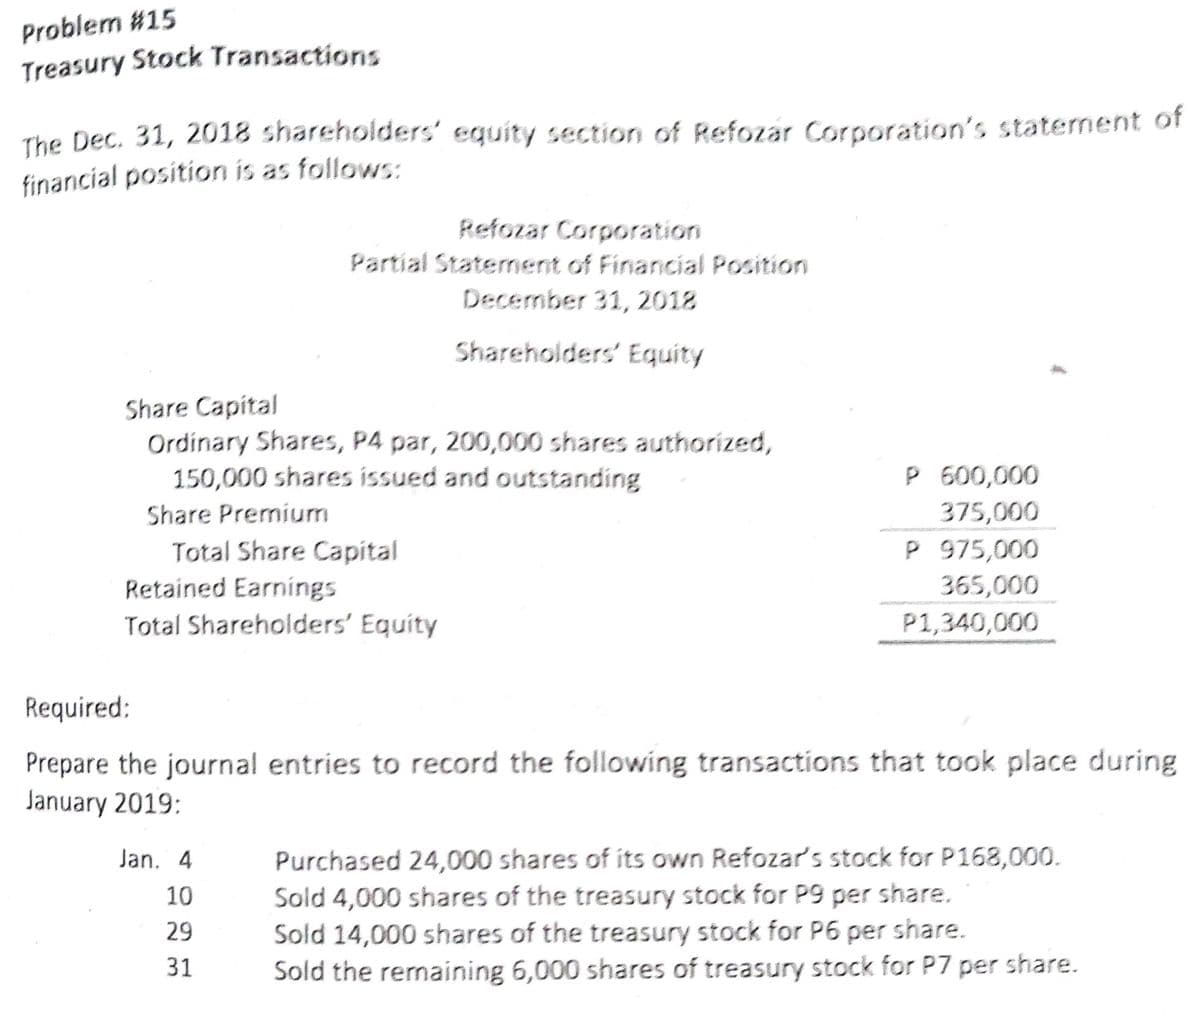 Problem #15
Treasury Stock Transactions
The Dec. 31, 2018 shareholders' equity section of Refozar Corporation's staternent of
financial position is as follows:
Refozar Corporation
Partial Statement of Financial Position
December 31, 2018
Shareholders' Equity
Share Capital
Ordinary Shares, P4 par, 200,000 shares authorized,
150,000 shares issued and outstanding
P 600,000
Share Premium
375,000
P 975,000
Total Share Capital
Retained Earníngs
Total Shareholders' Equity
365,000
P1,340,000
Required:
Prepare the journal entries to record the following transactions that took place during
January 2019:
Purchased 24,000 shares of its own Refozar's stock for P168,000.
Sold 4,000 shares of the treasury stock for P9 per share.
Sold 14,000 shares of the treasury stock for P6 per share.
Sold the rernaining 6,000 shares of treasury stock for P7 per share.
Jan. 4
10
29
31
